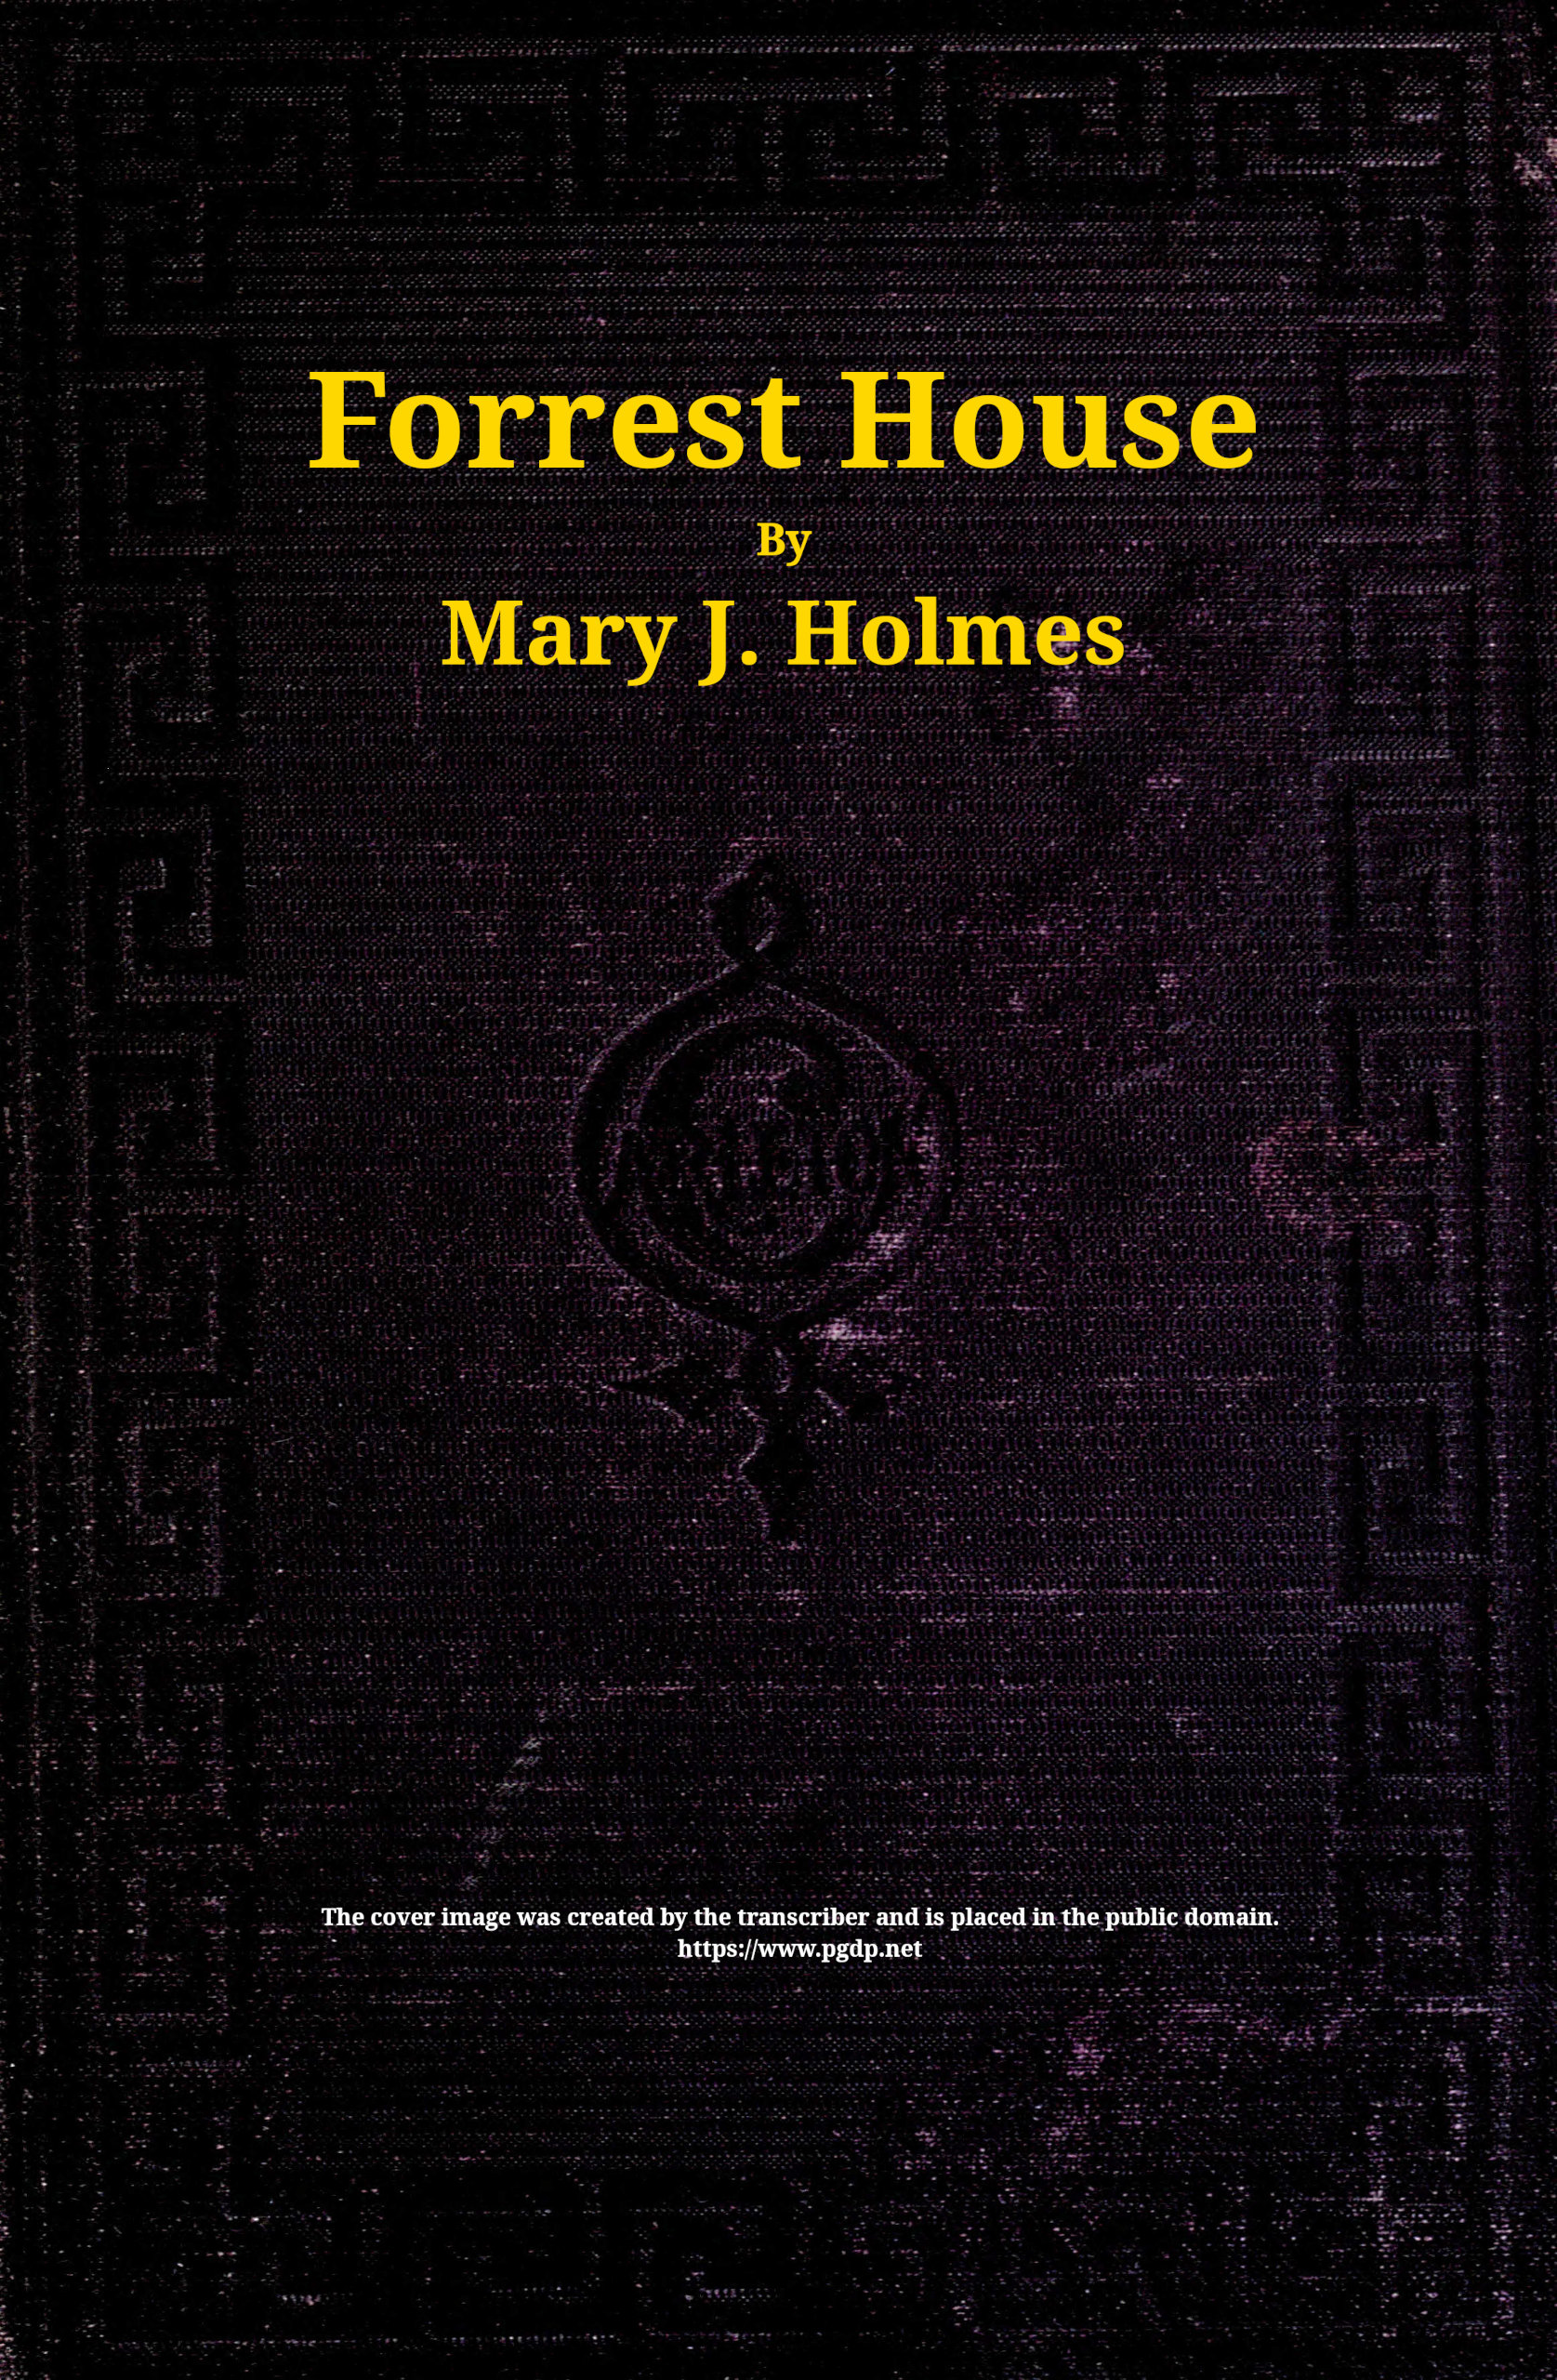 Forrest House